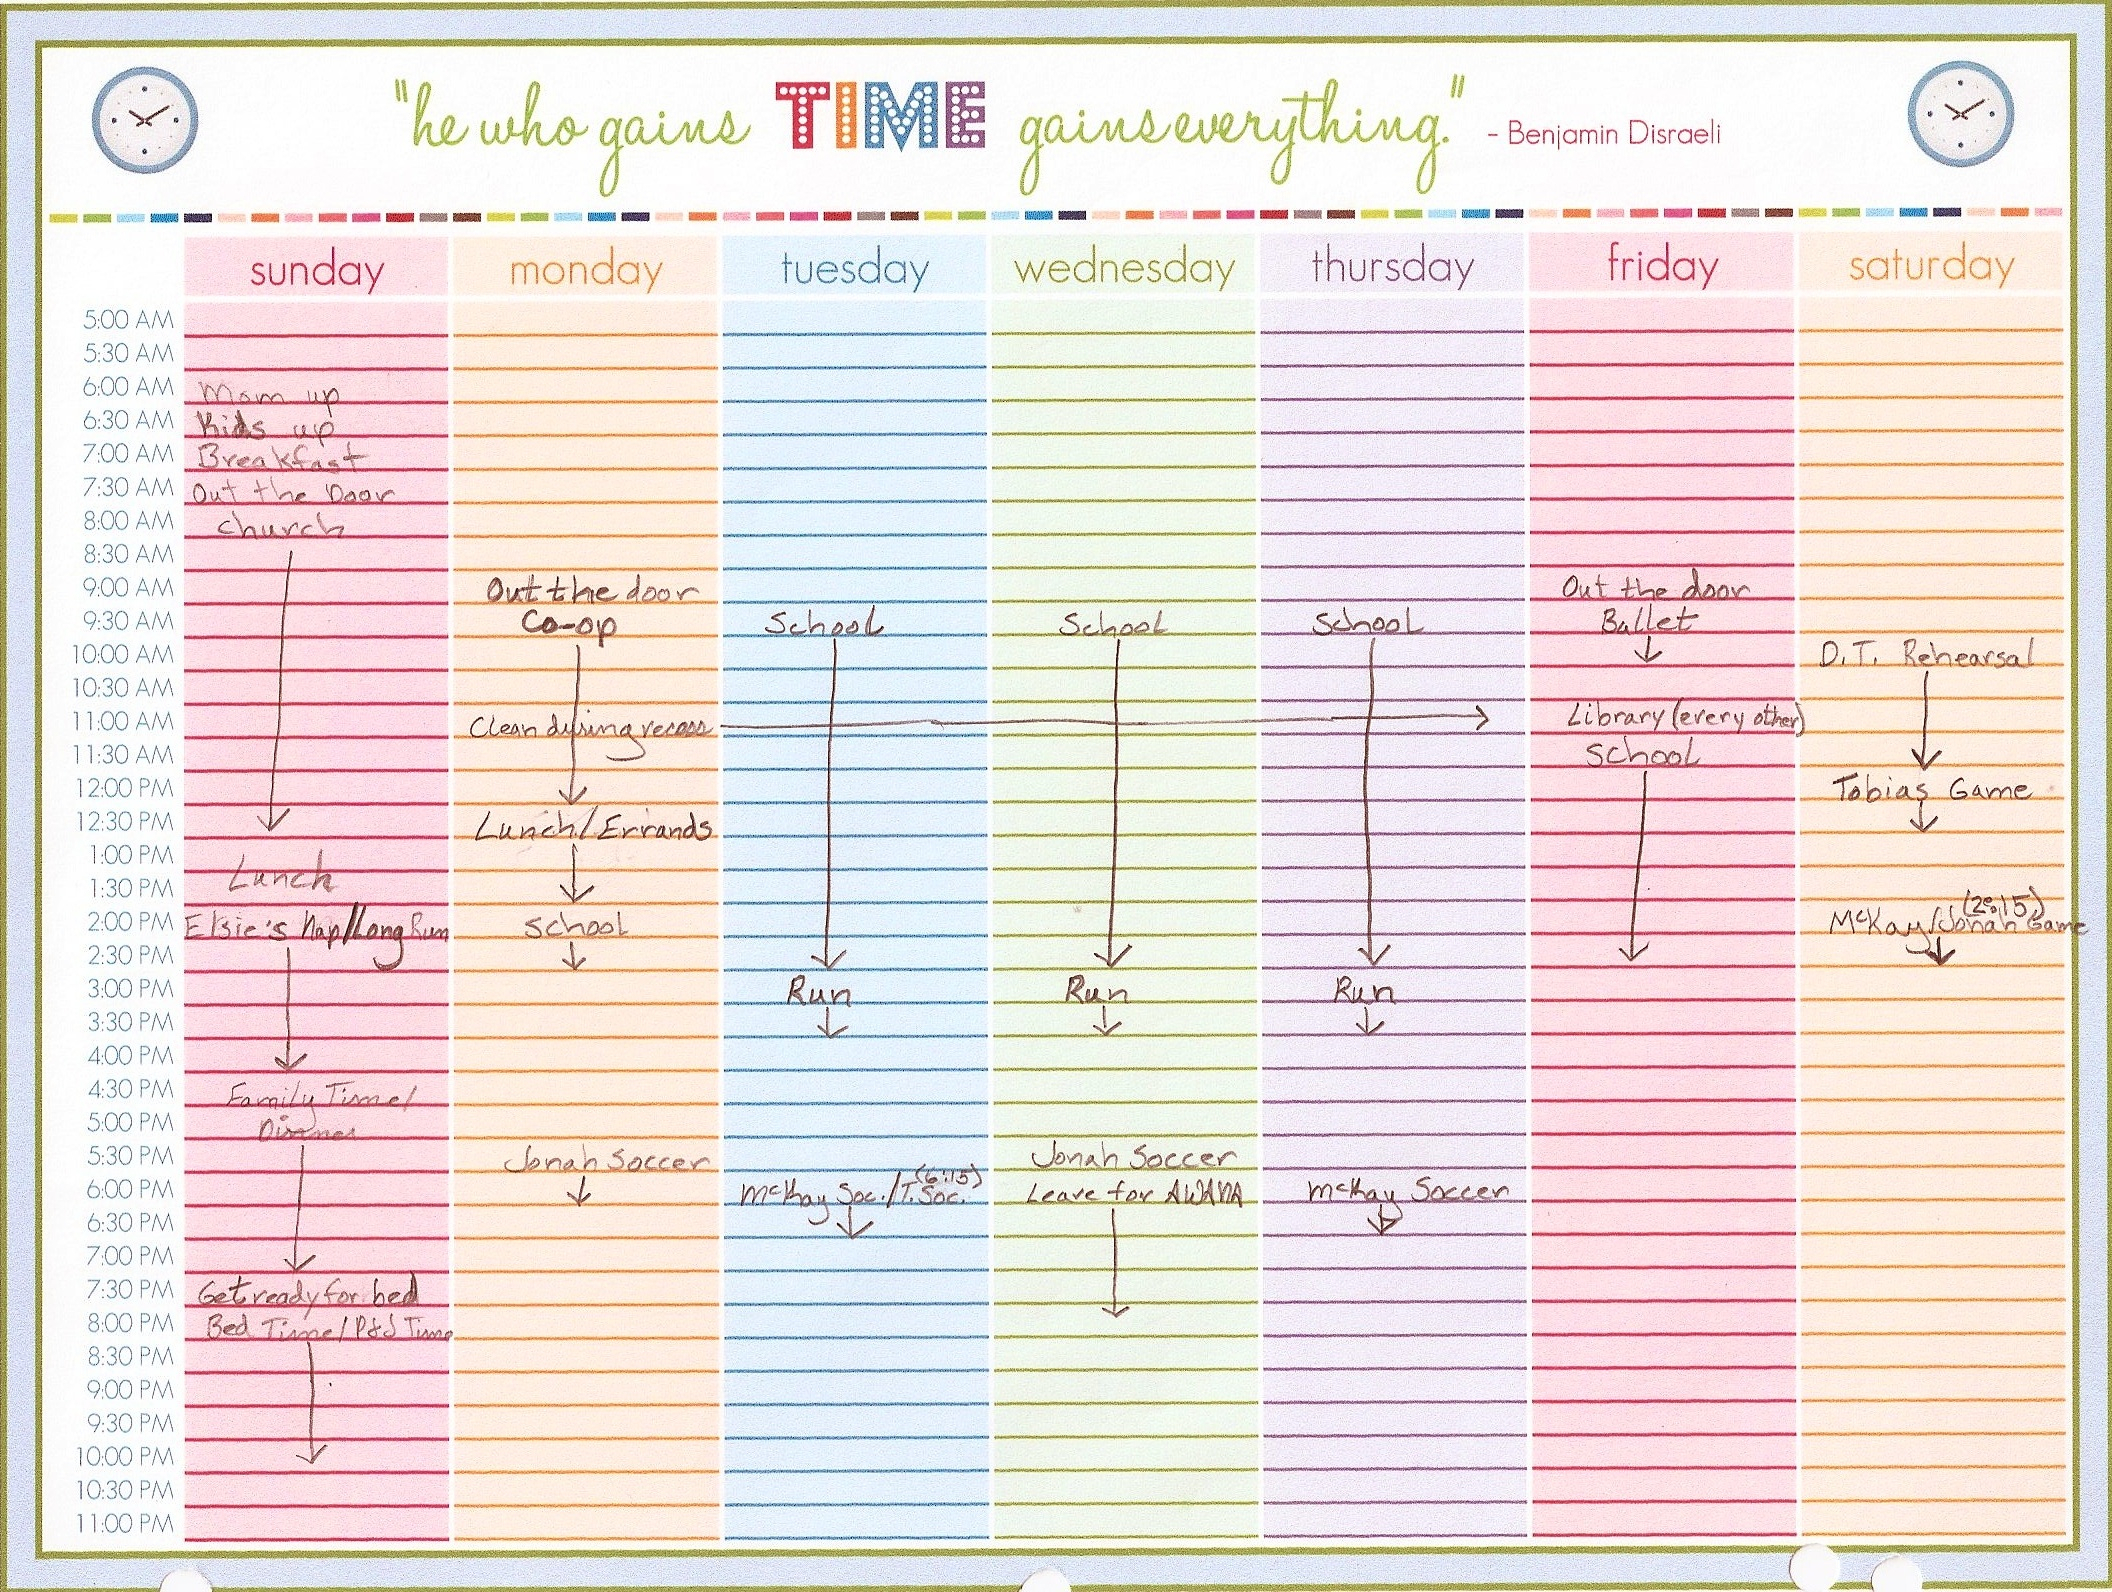 Free Calendar Template With Time Slots | Calendar Template in Printable Weekly Calendar Template With Time Slots